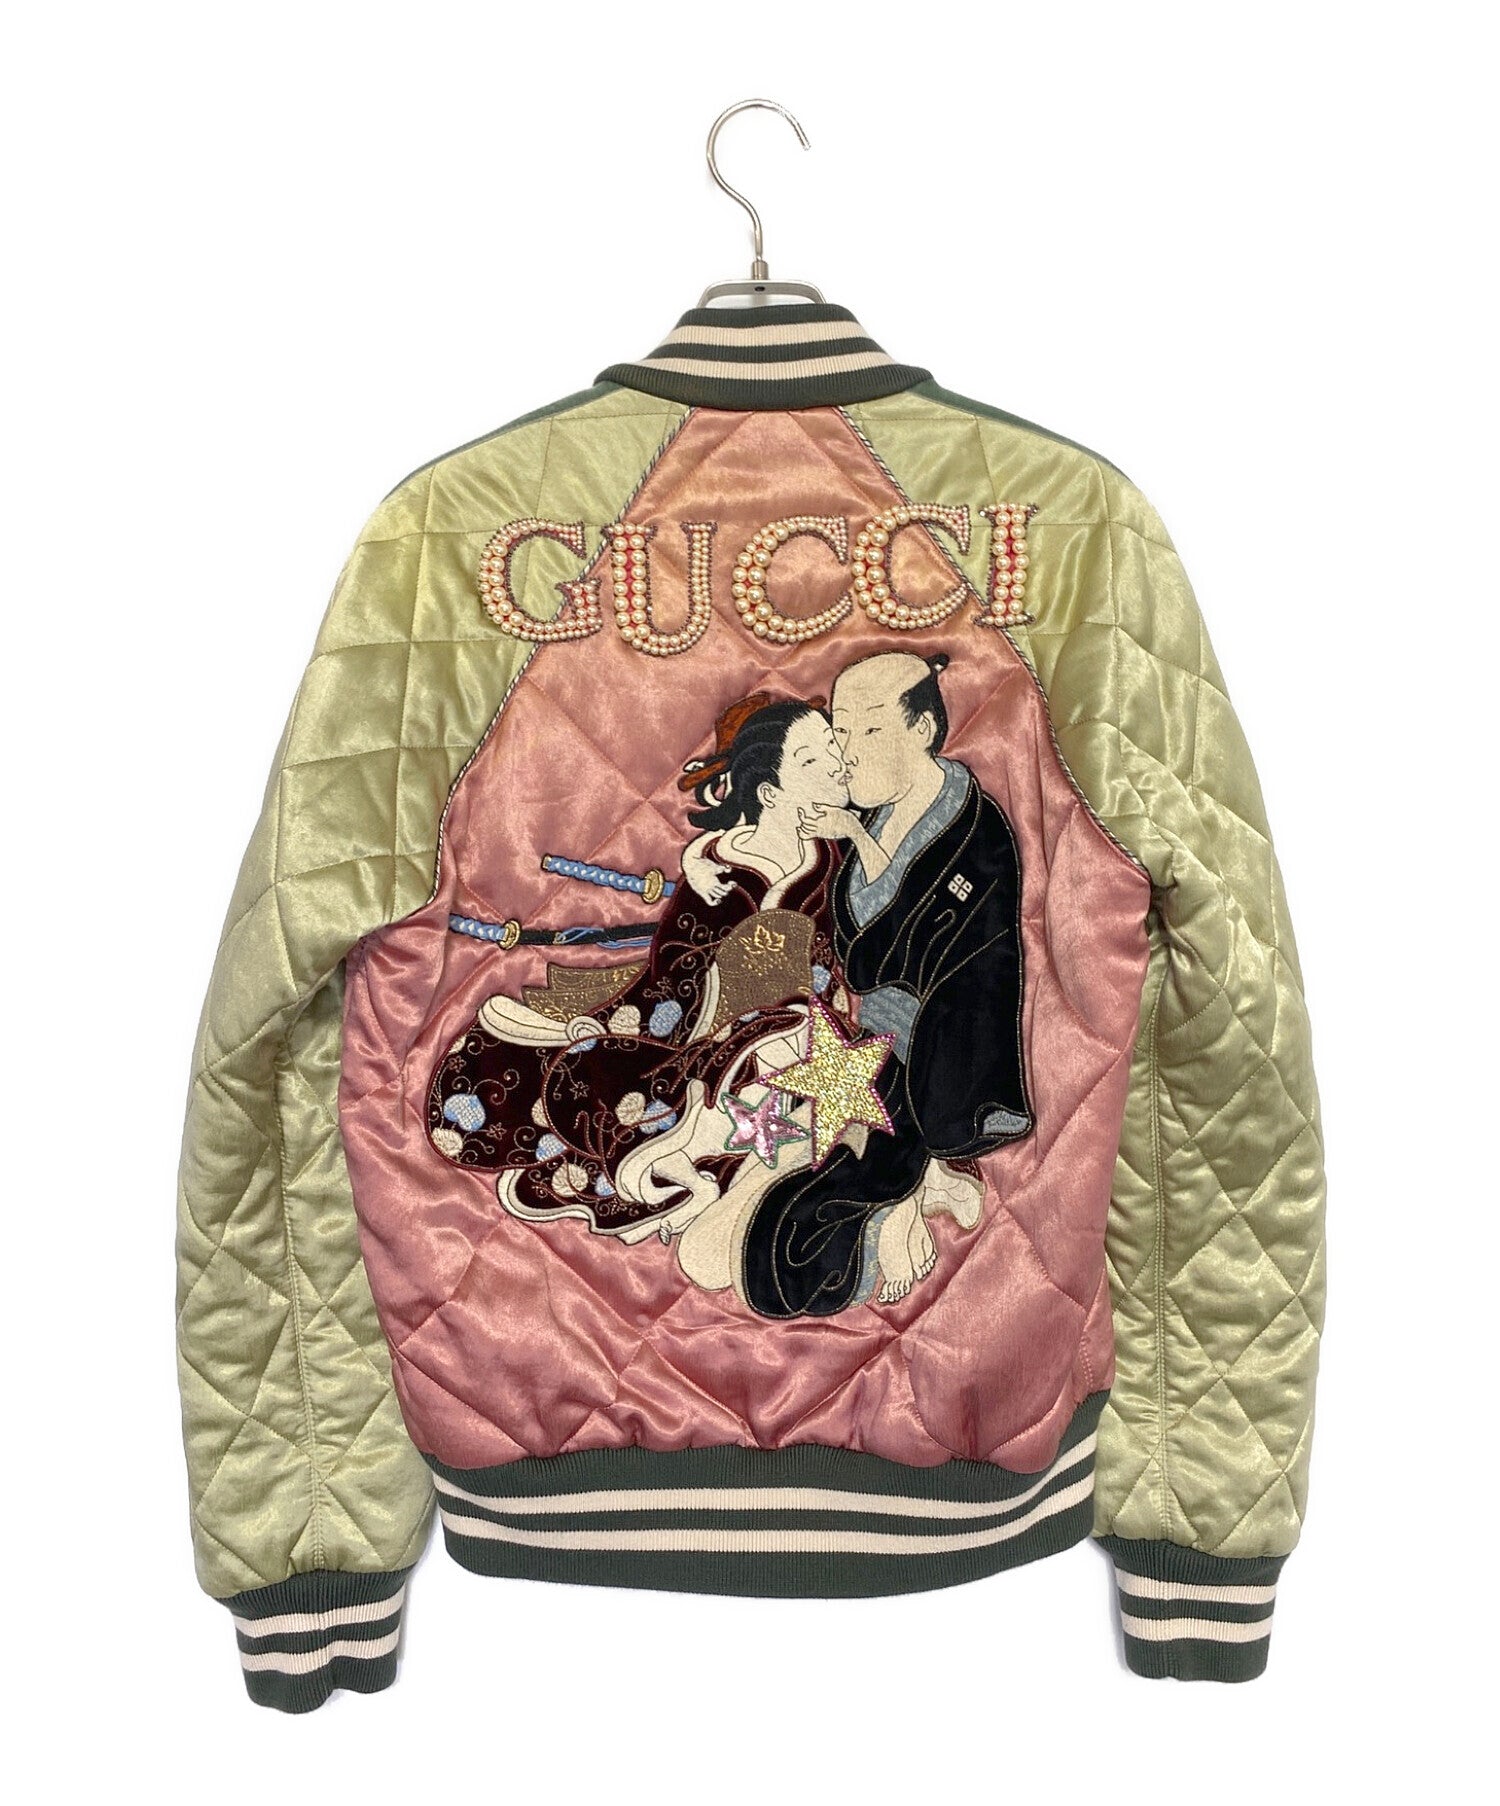 Archive Factory Gucci Shunga Embroidery Souvenir Jacket 502739 XR938